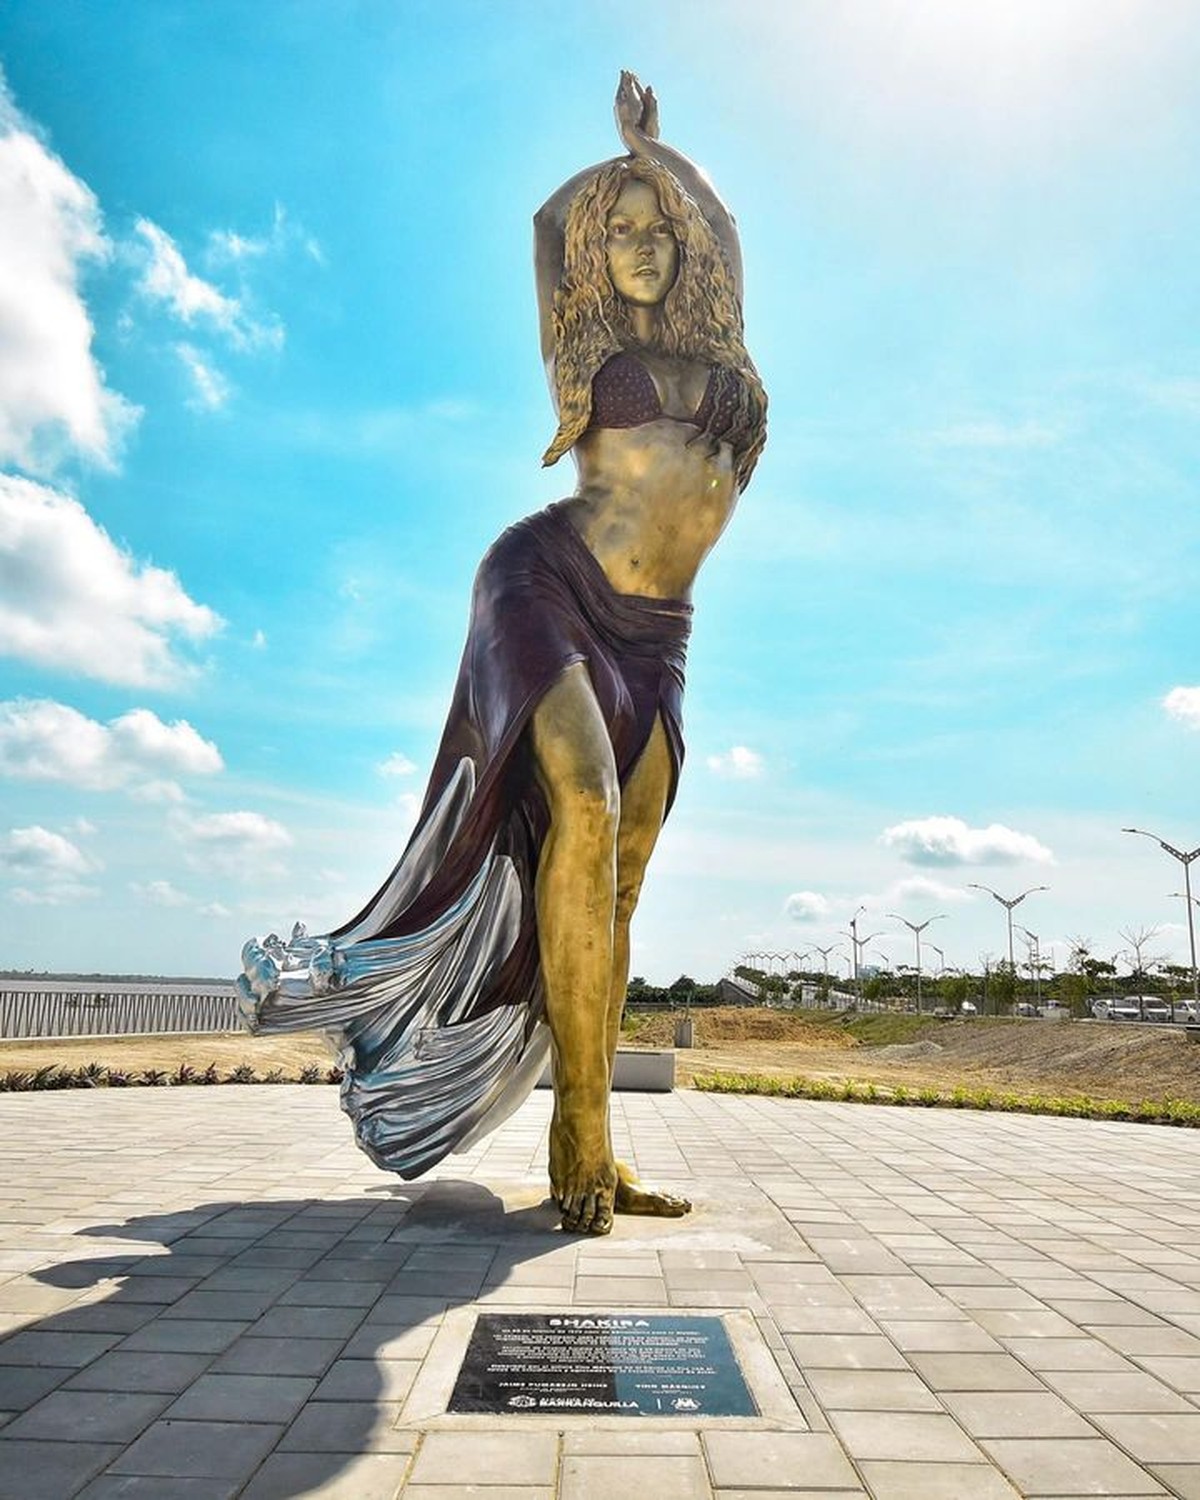 Shakira honored with a 6.5-meter statue in Colombia |  Pop art